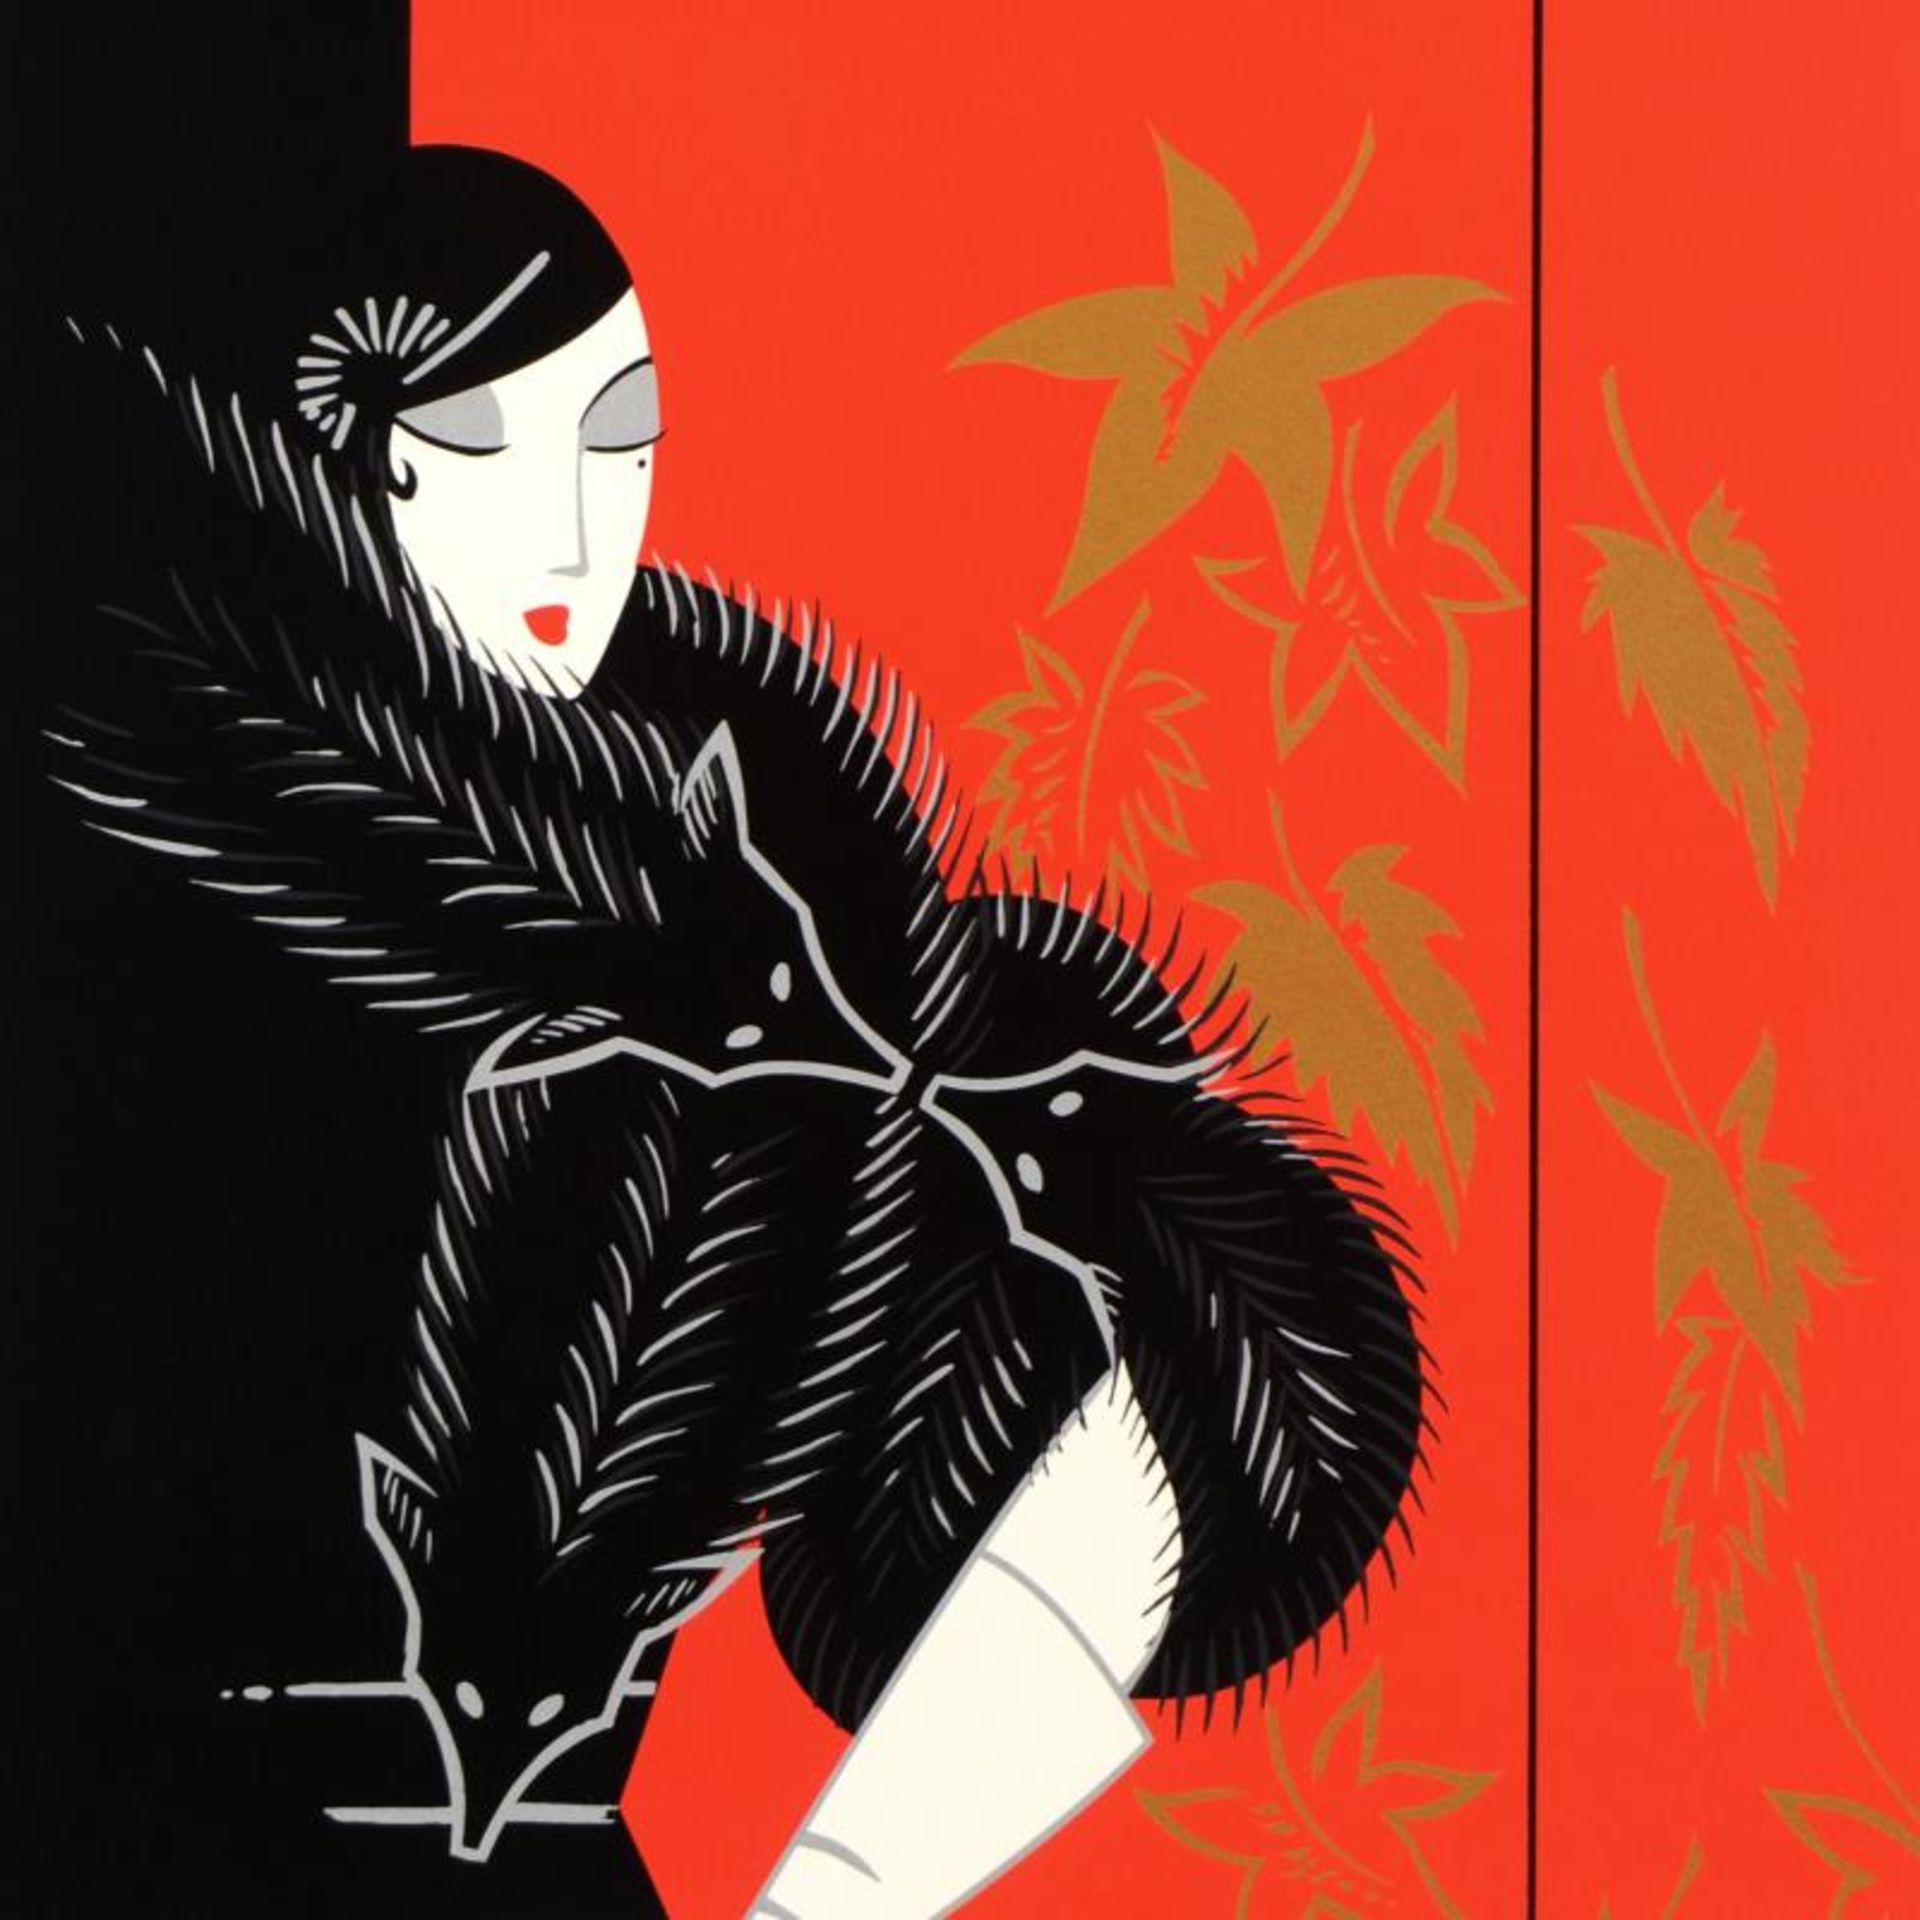 Furs by Erte (1892-1990) - Image 2 of 2